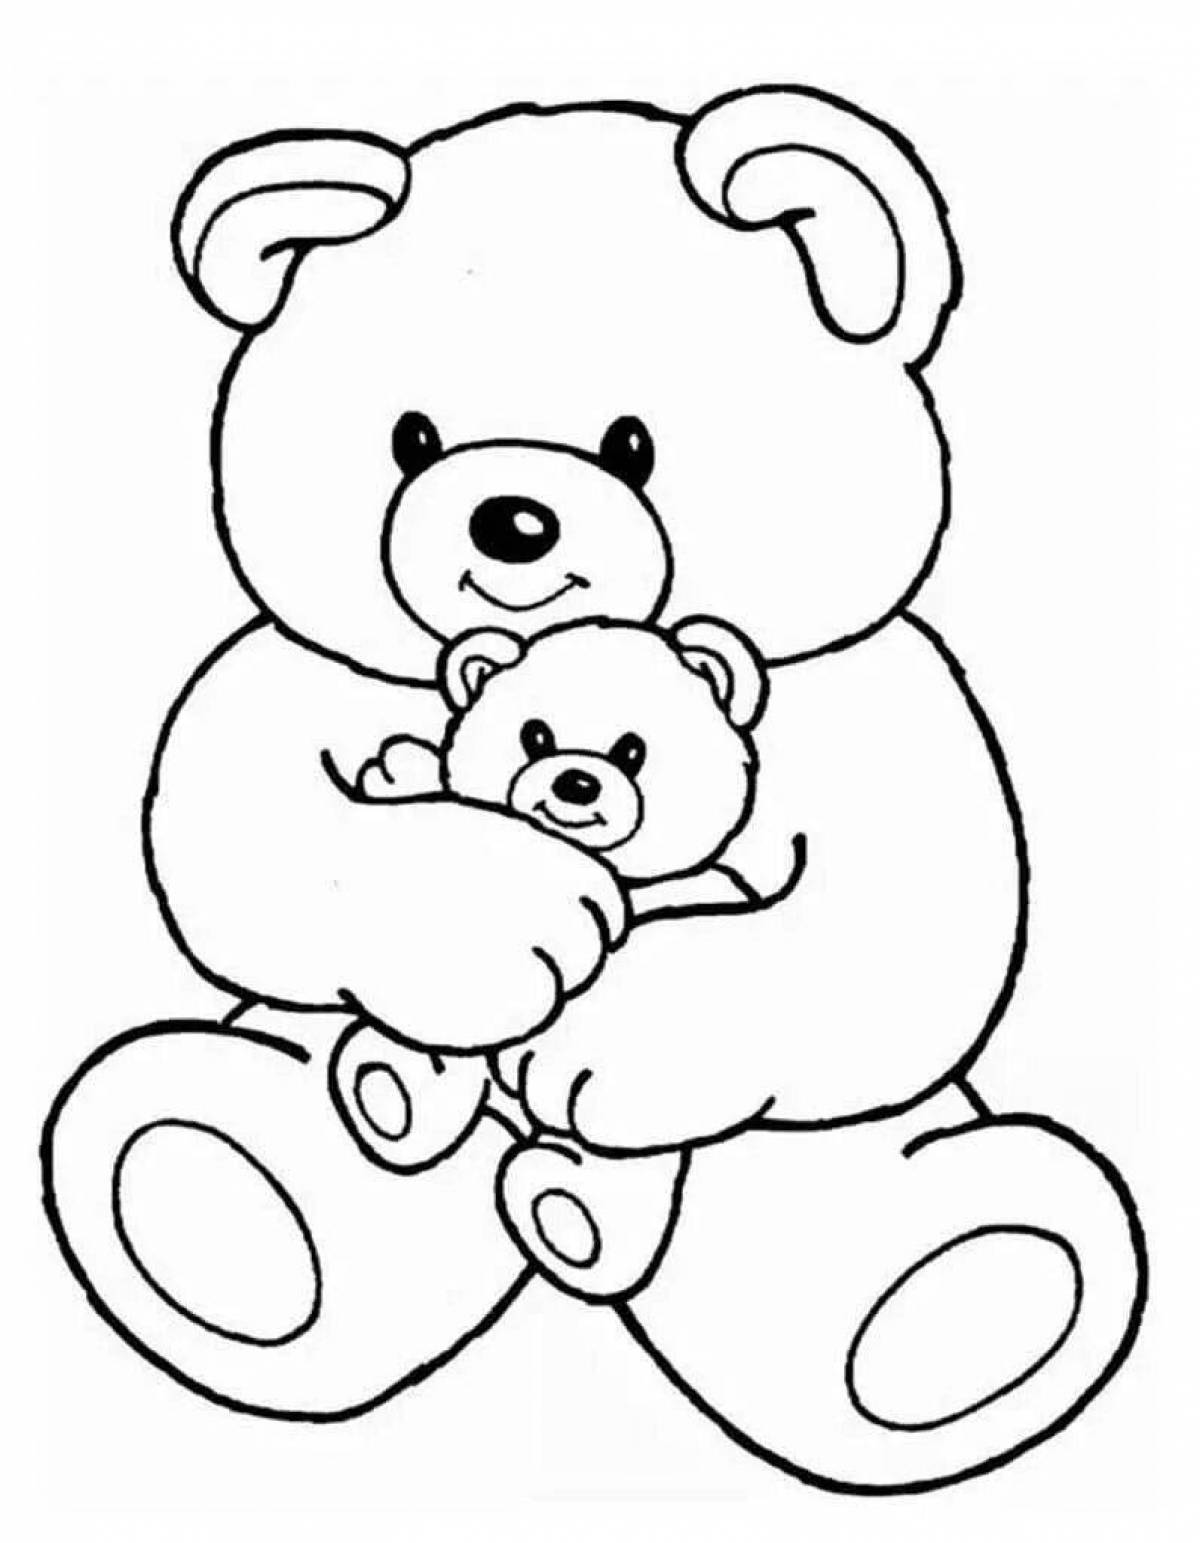 Colorful teddy bear pattern for kids